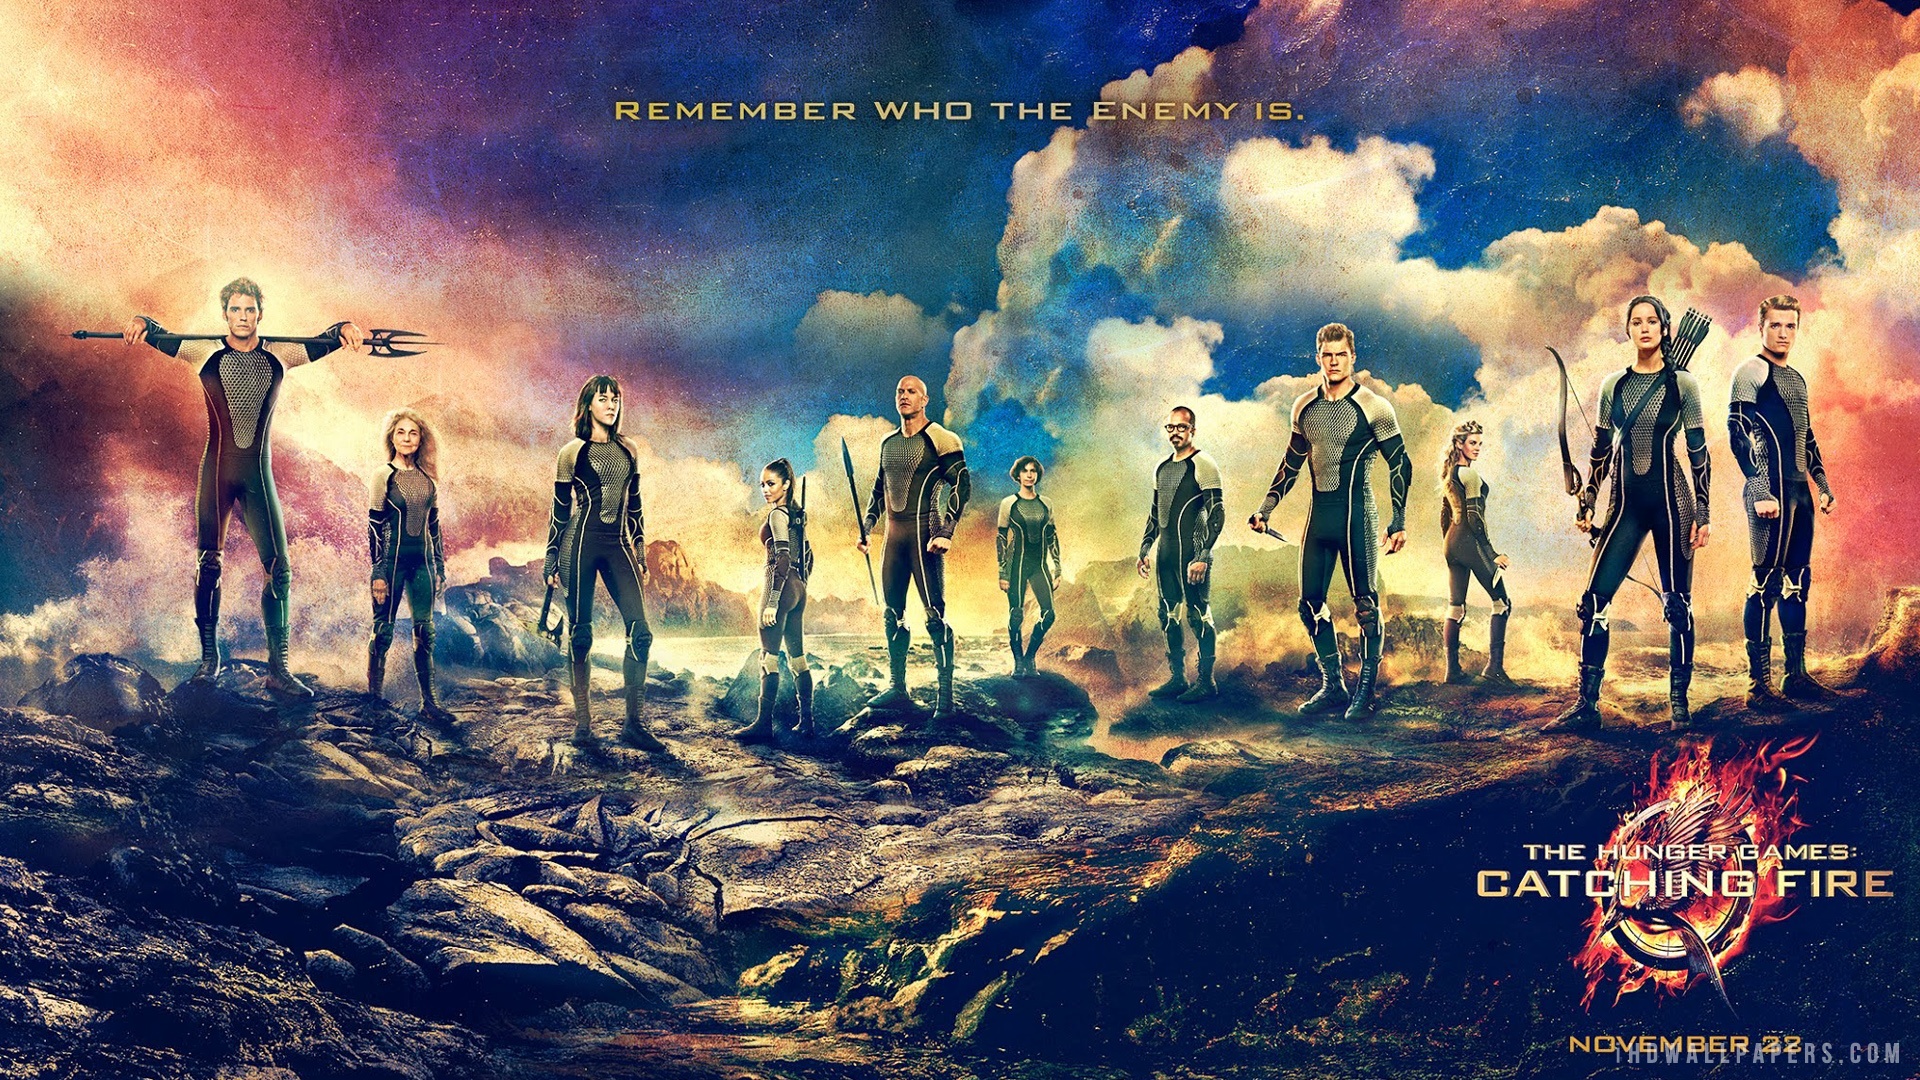 The Hunger Games Catching Fire Wallpaper From